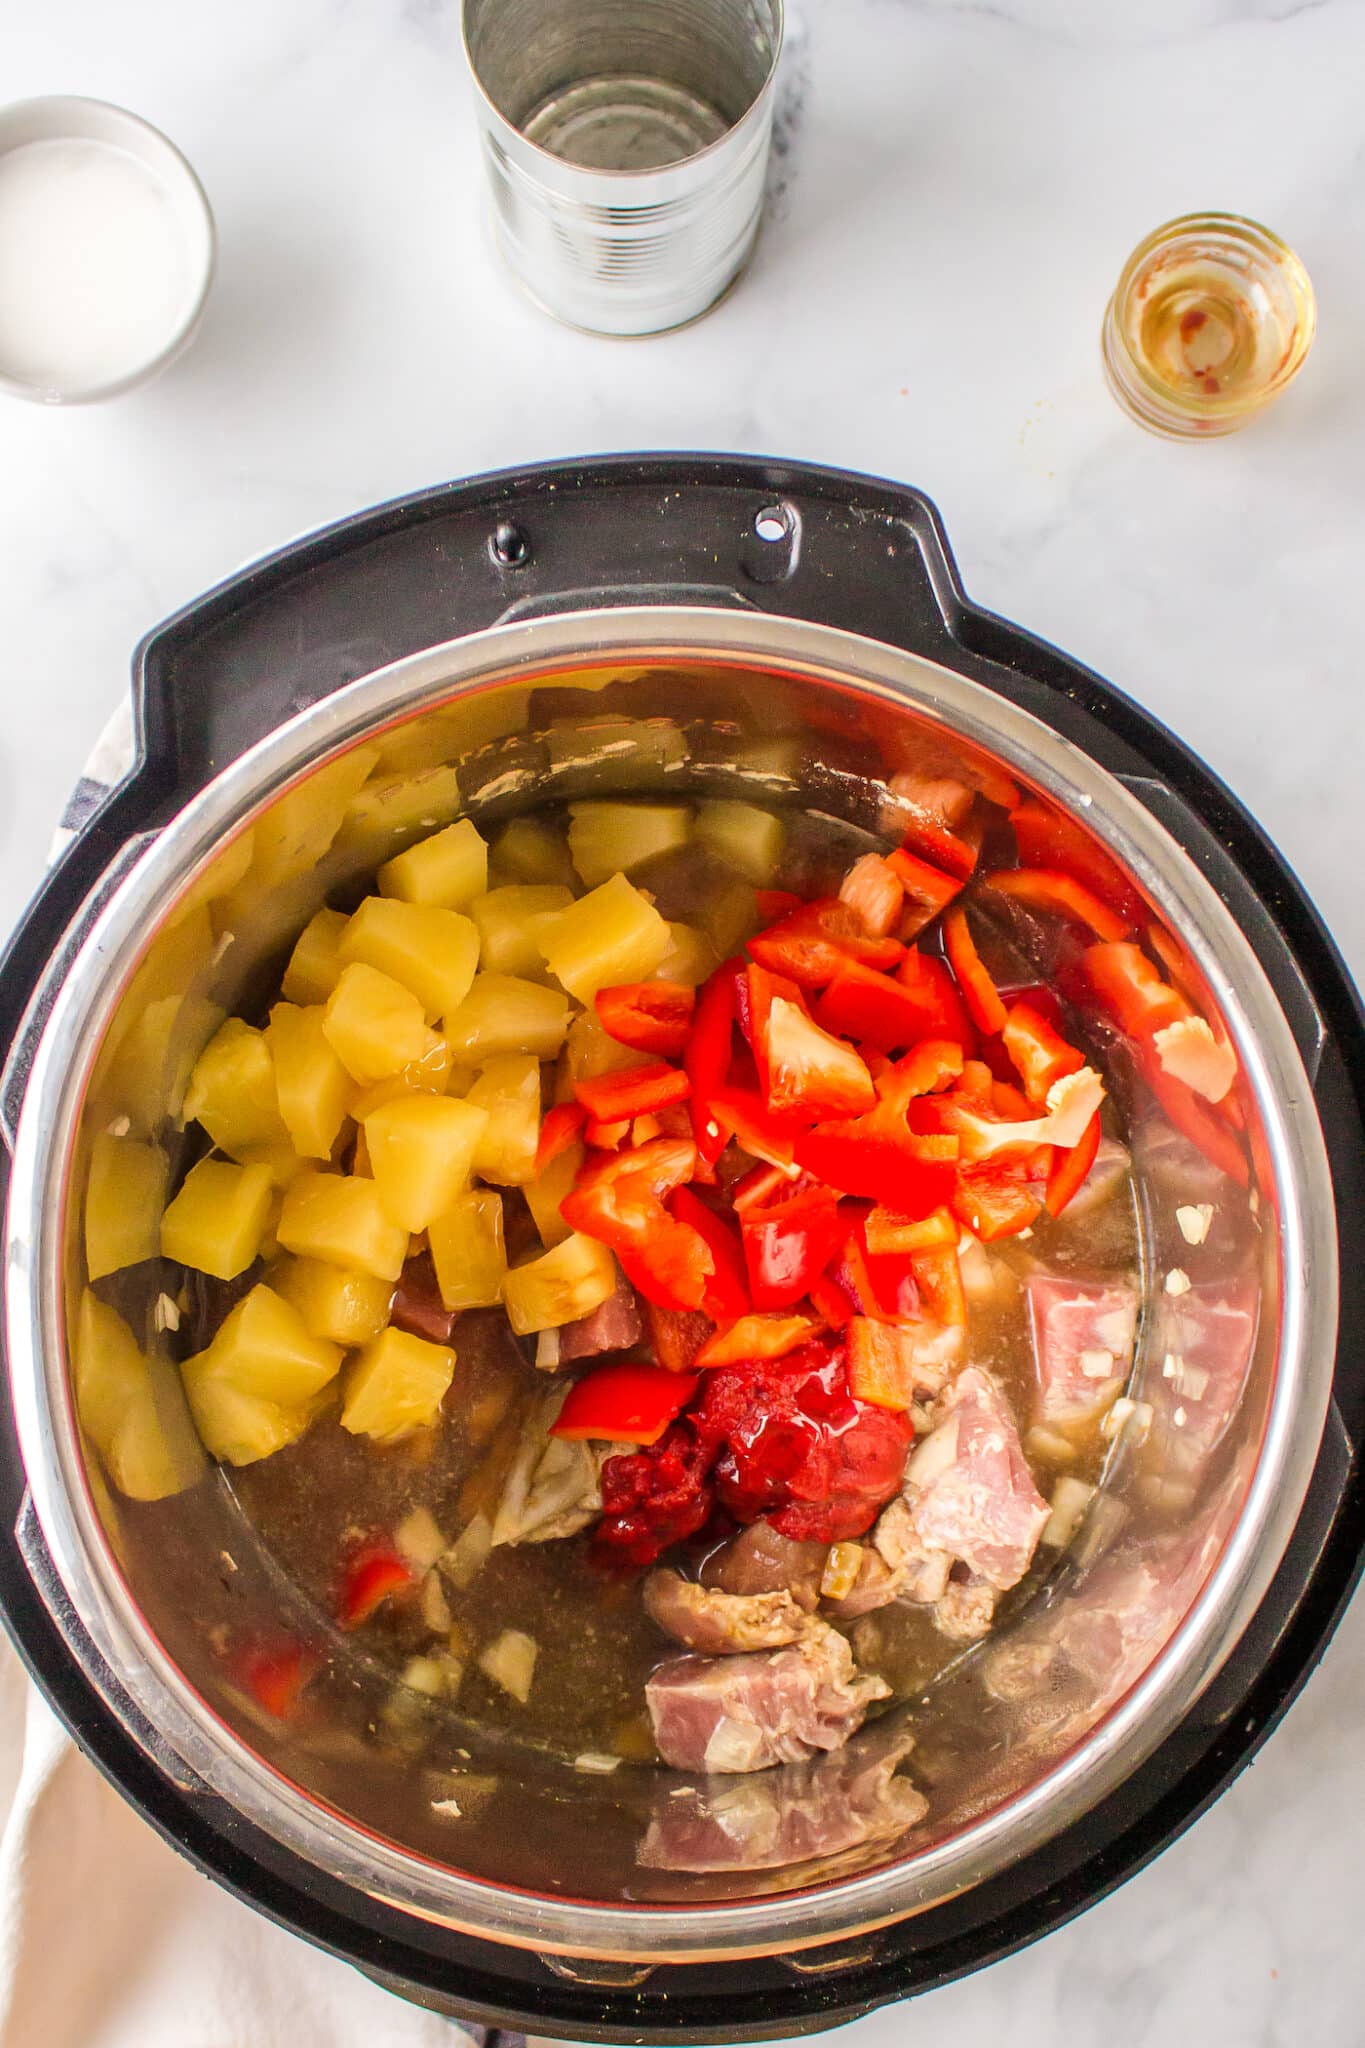 Pineapple and diced peppers with pork in an Instant Pot.